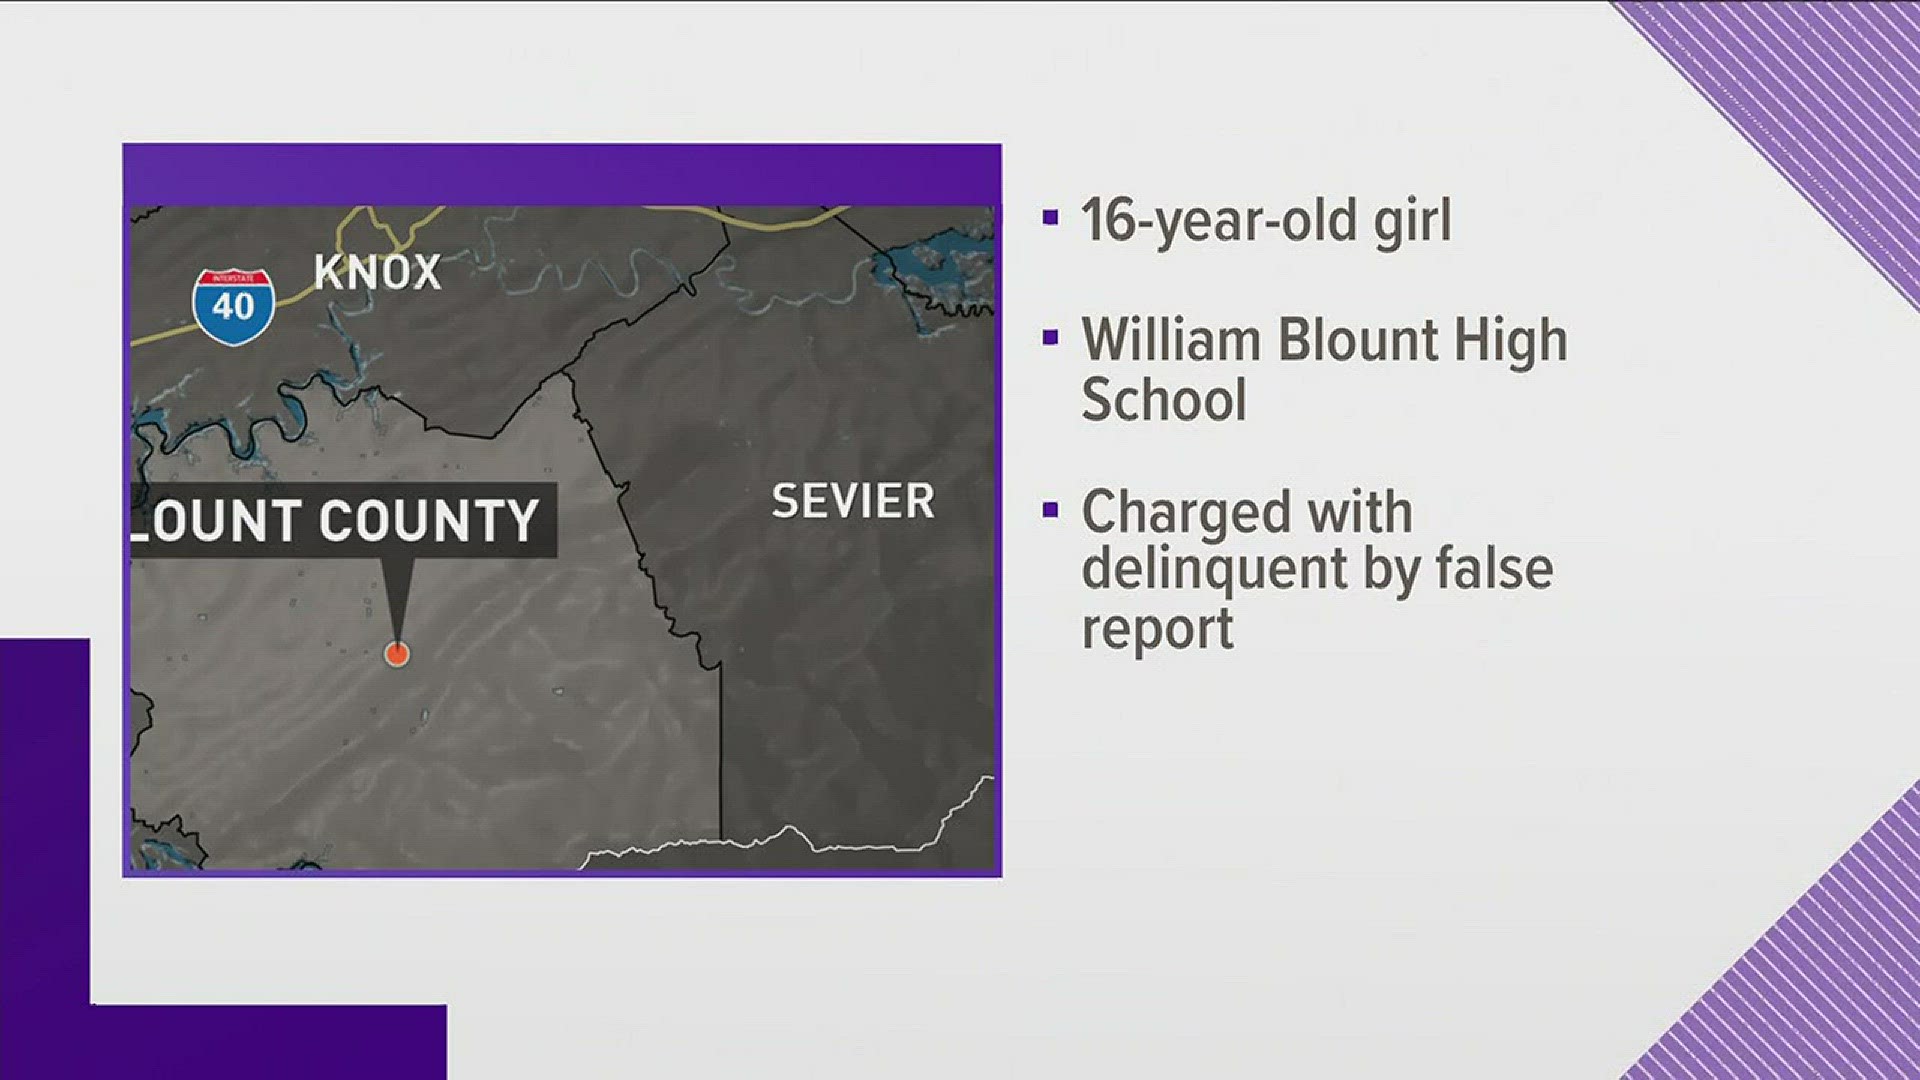 March 8, 2018: A 16-year-old William Blount High School student is in custody after authorities say she admitted to writing a "hit list" on the wall of a school bathroom.